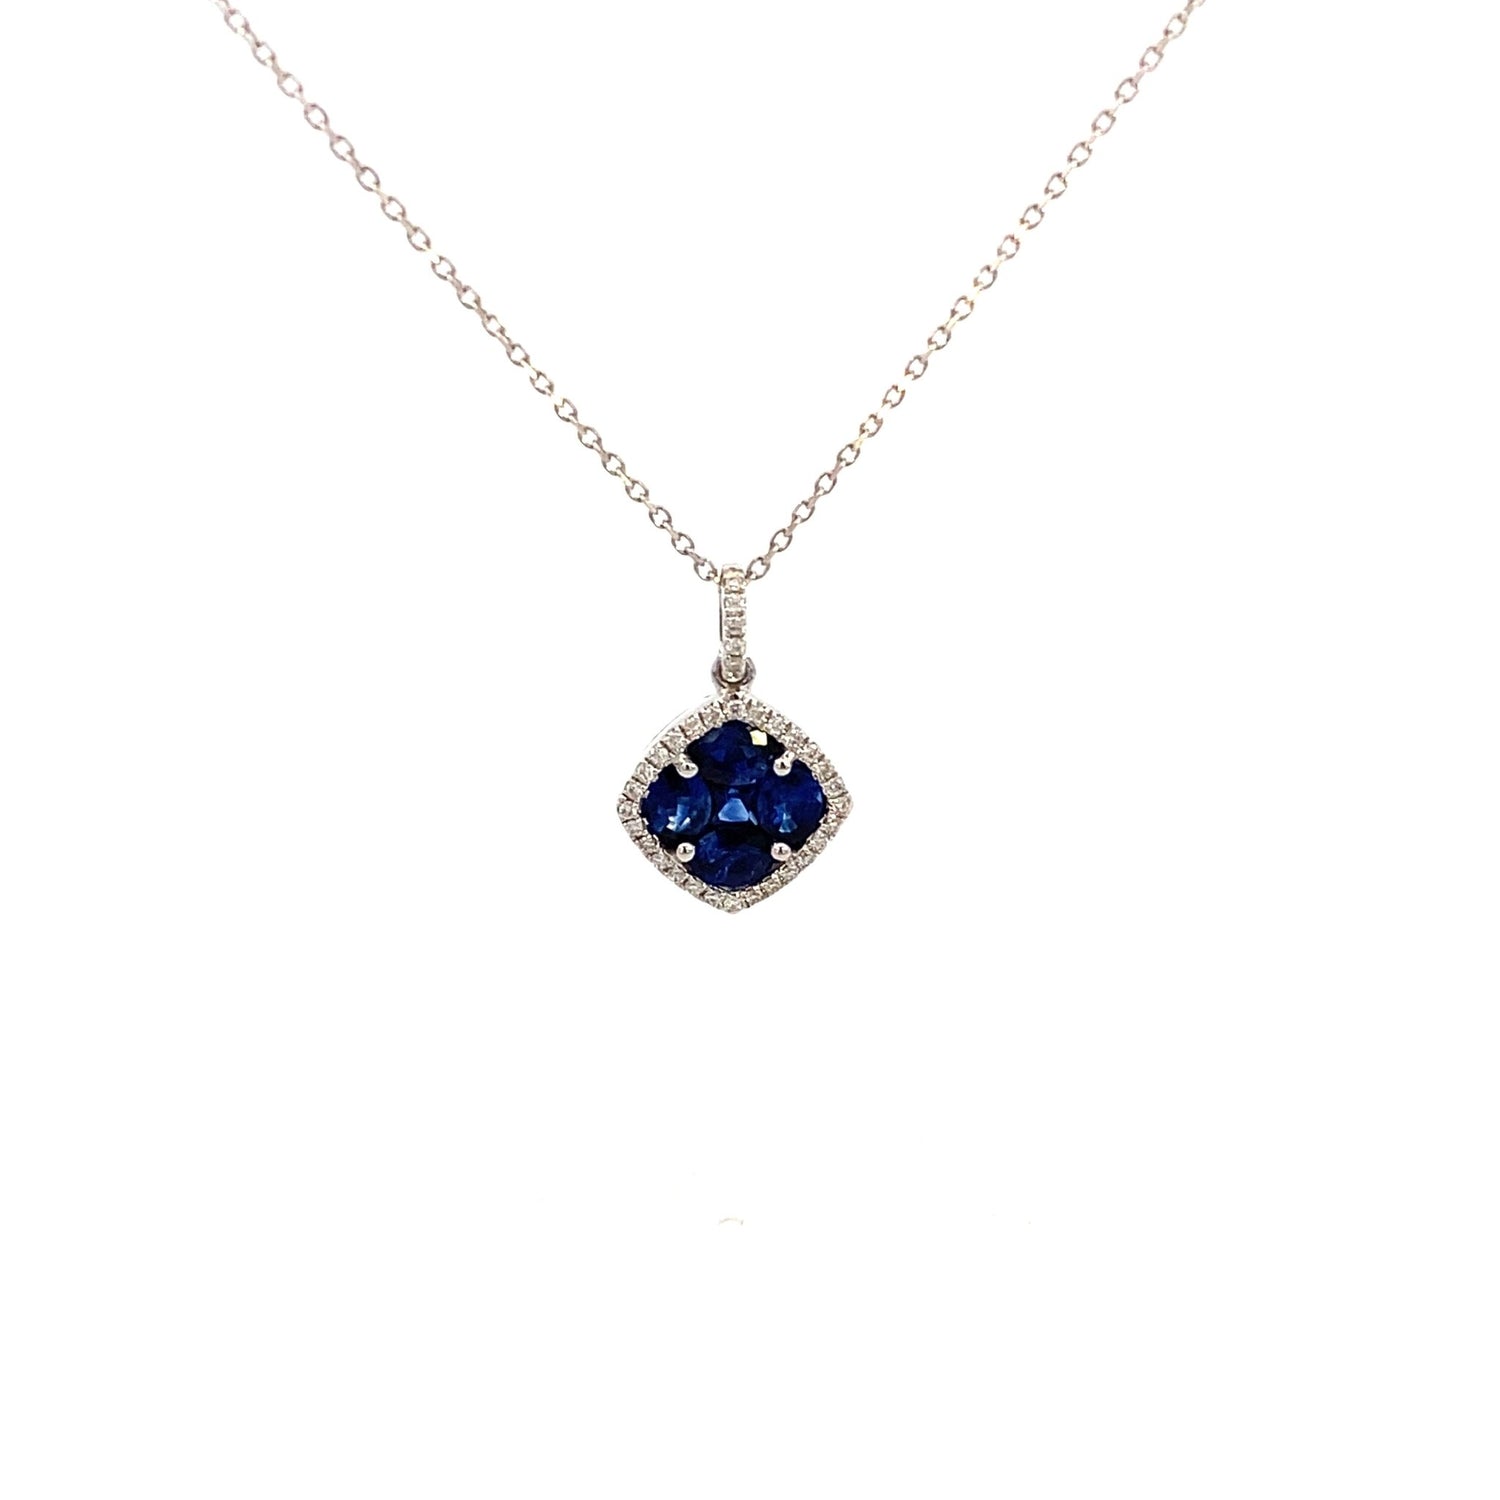 Necklace- 18kt wg pendant sapphire in diamond halo - Gaines Jewelers